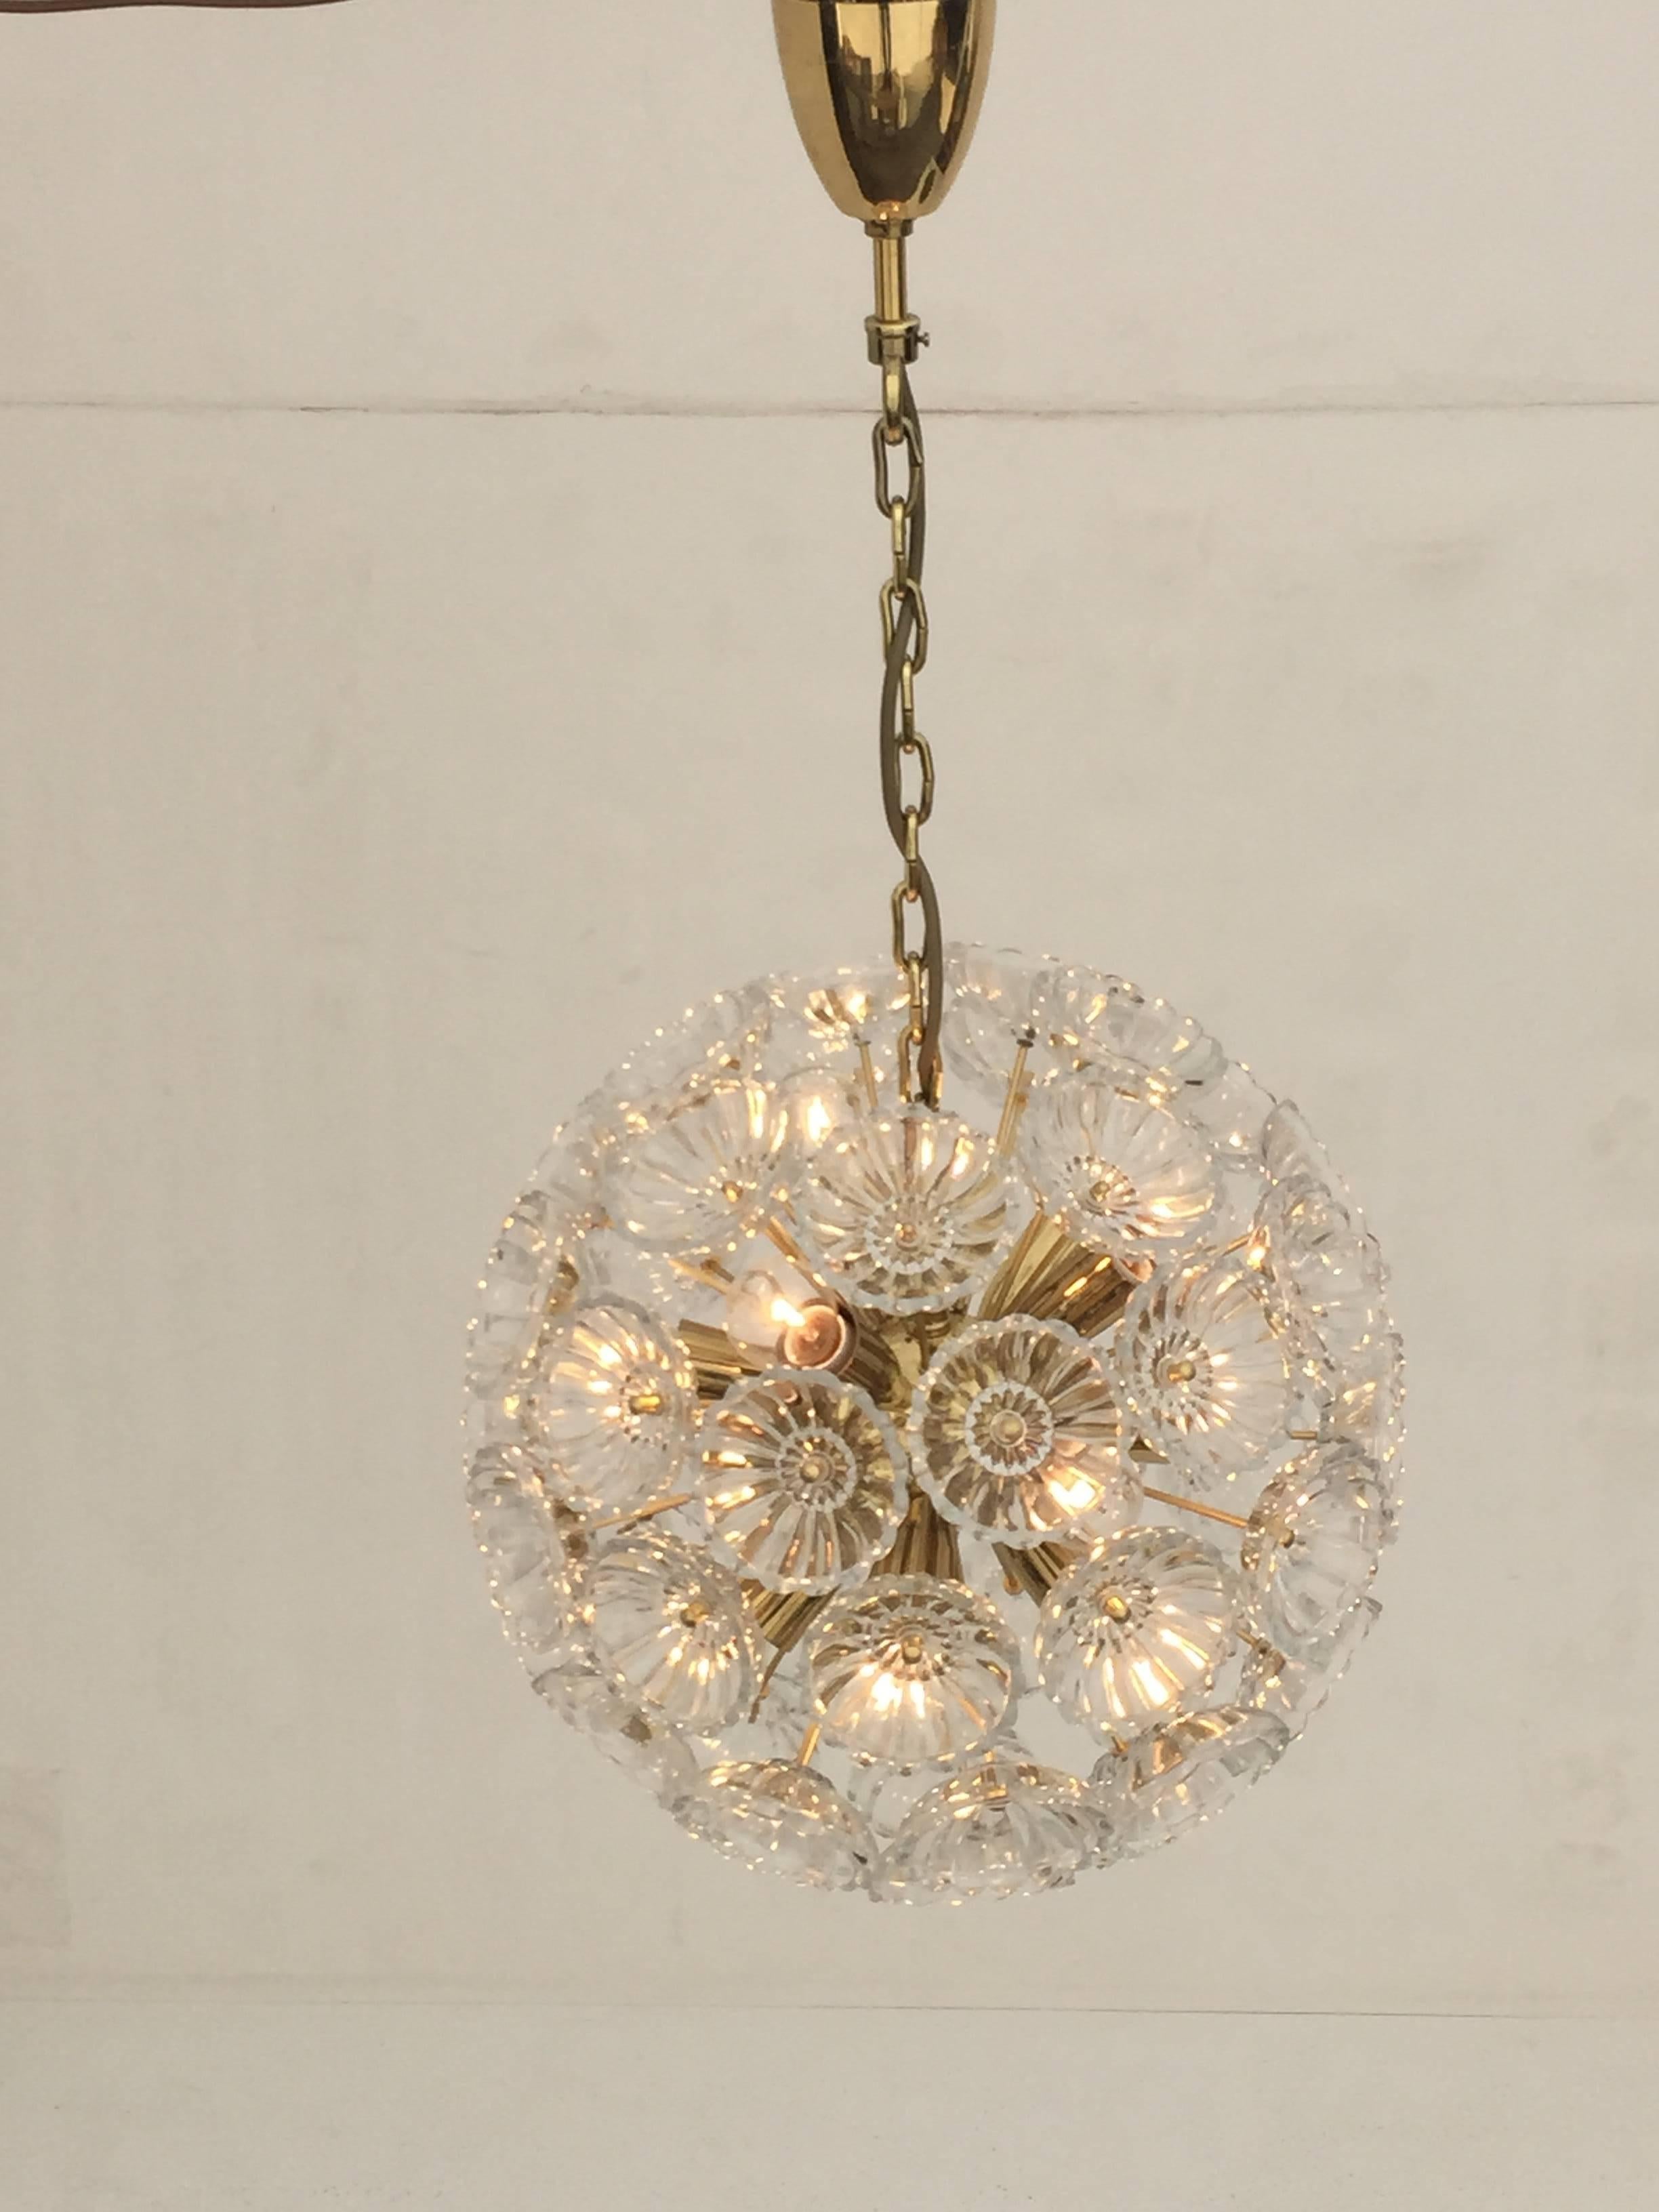 Floral glass and brass Blowball chandelier in the style of Emil Stejnar.
Uses E14 base bulbs up to 40 watt